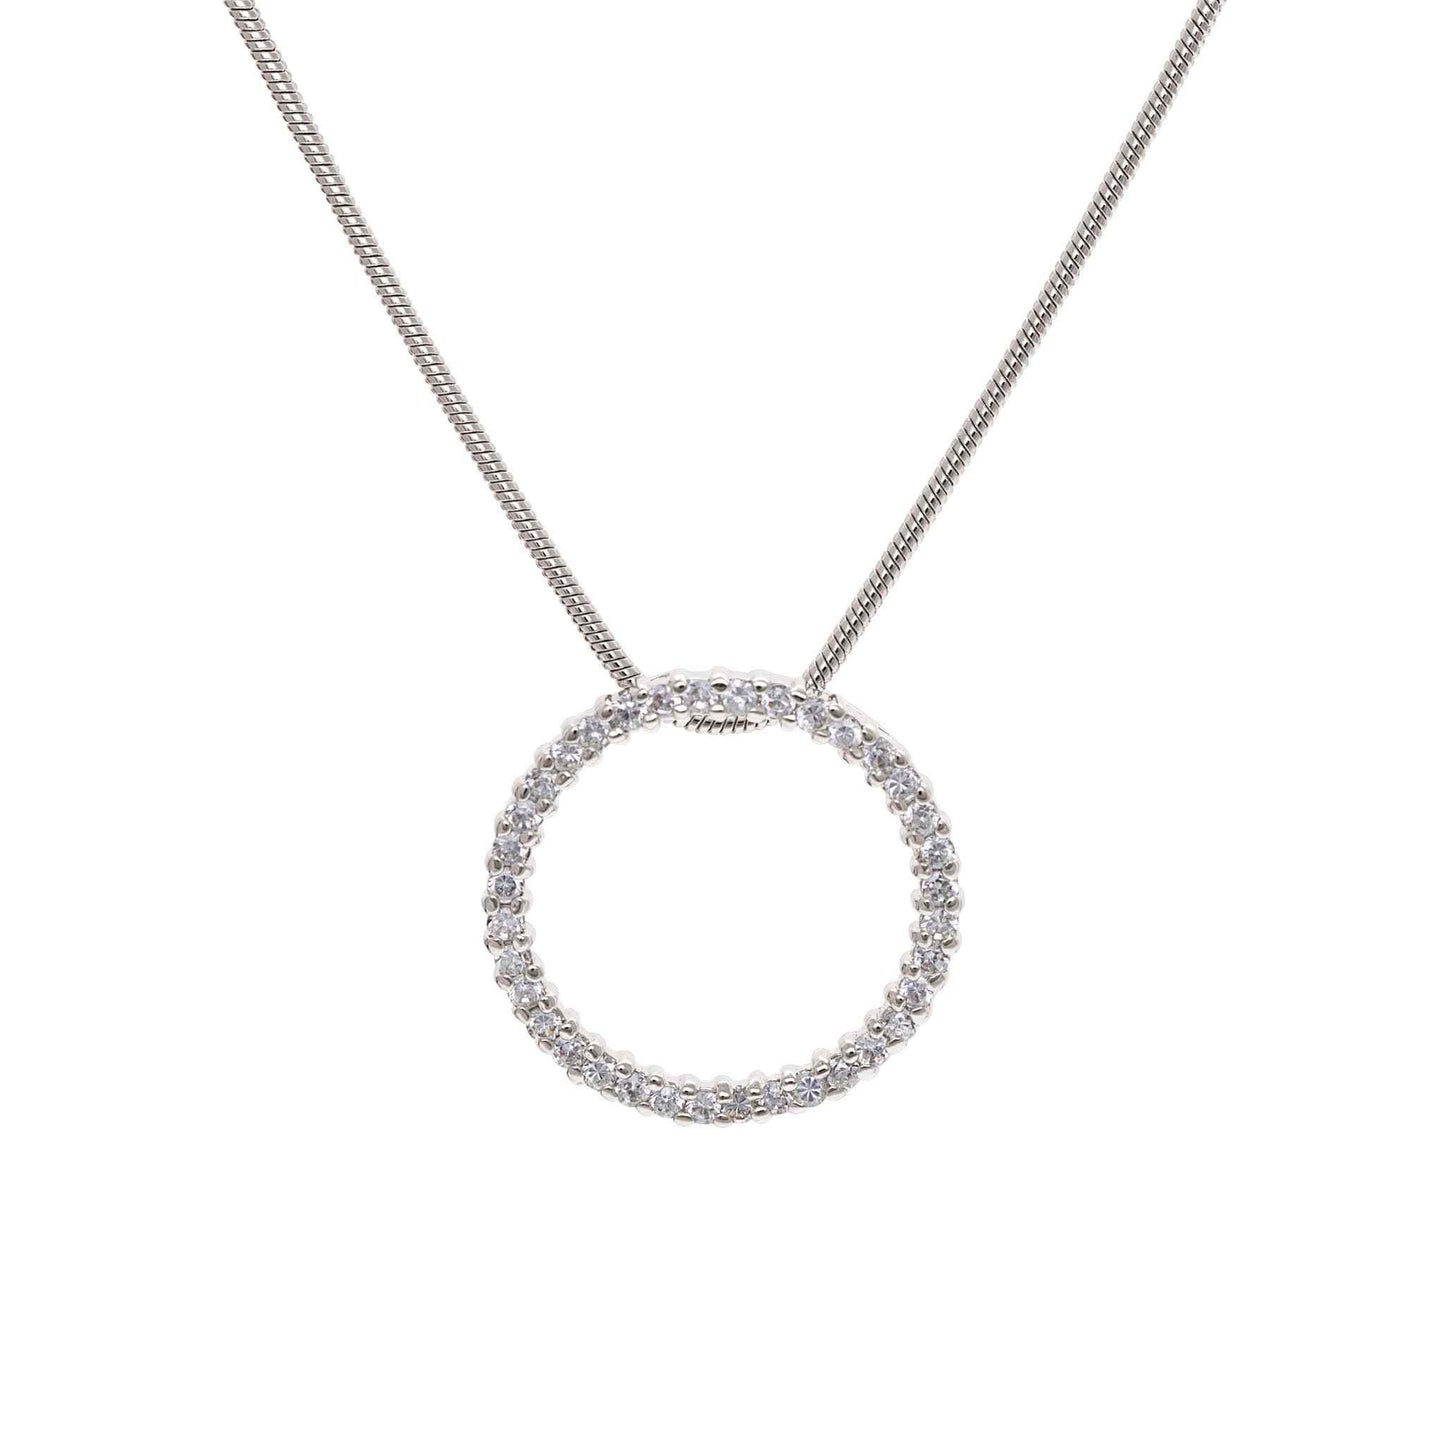 A simulated diamond circle necklace displayed on a neutral white background.